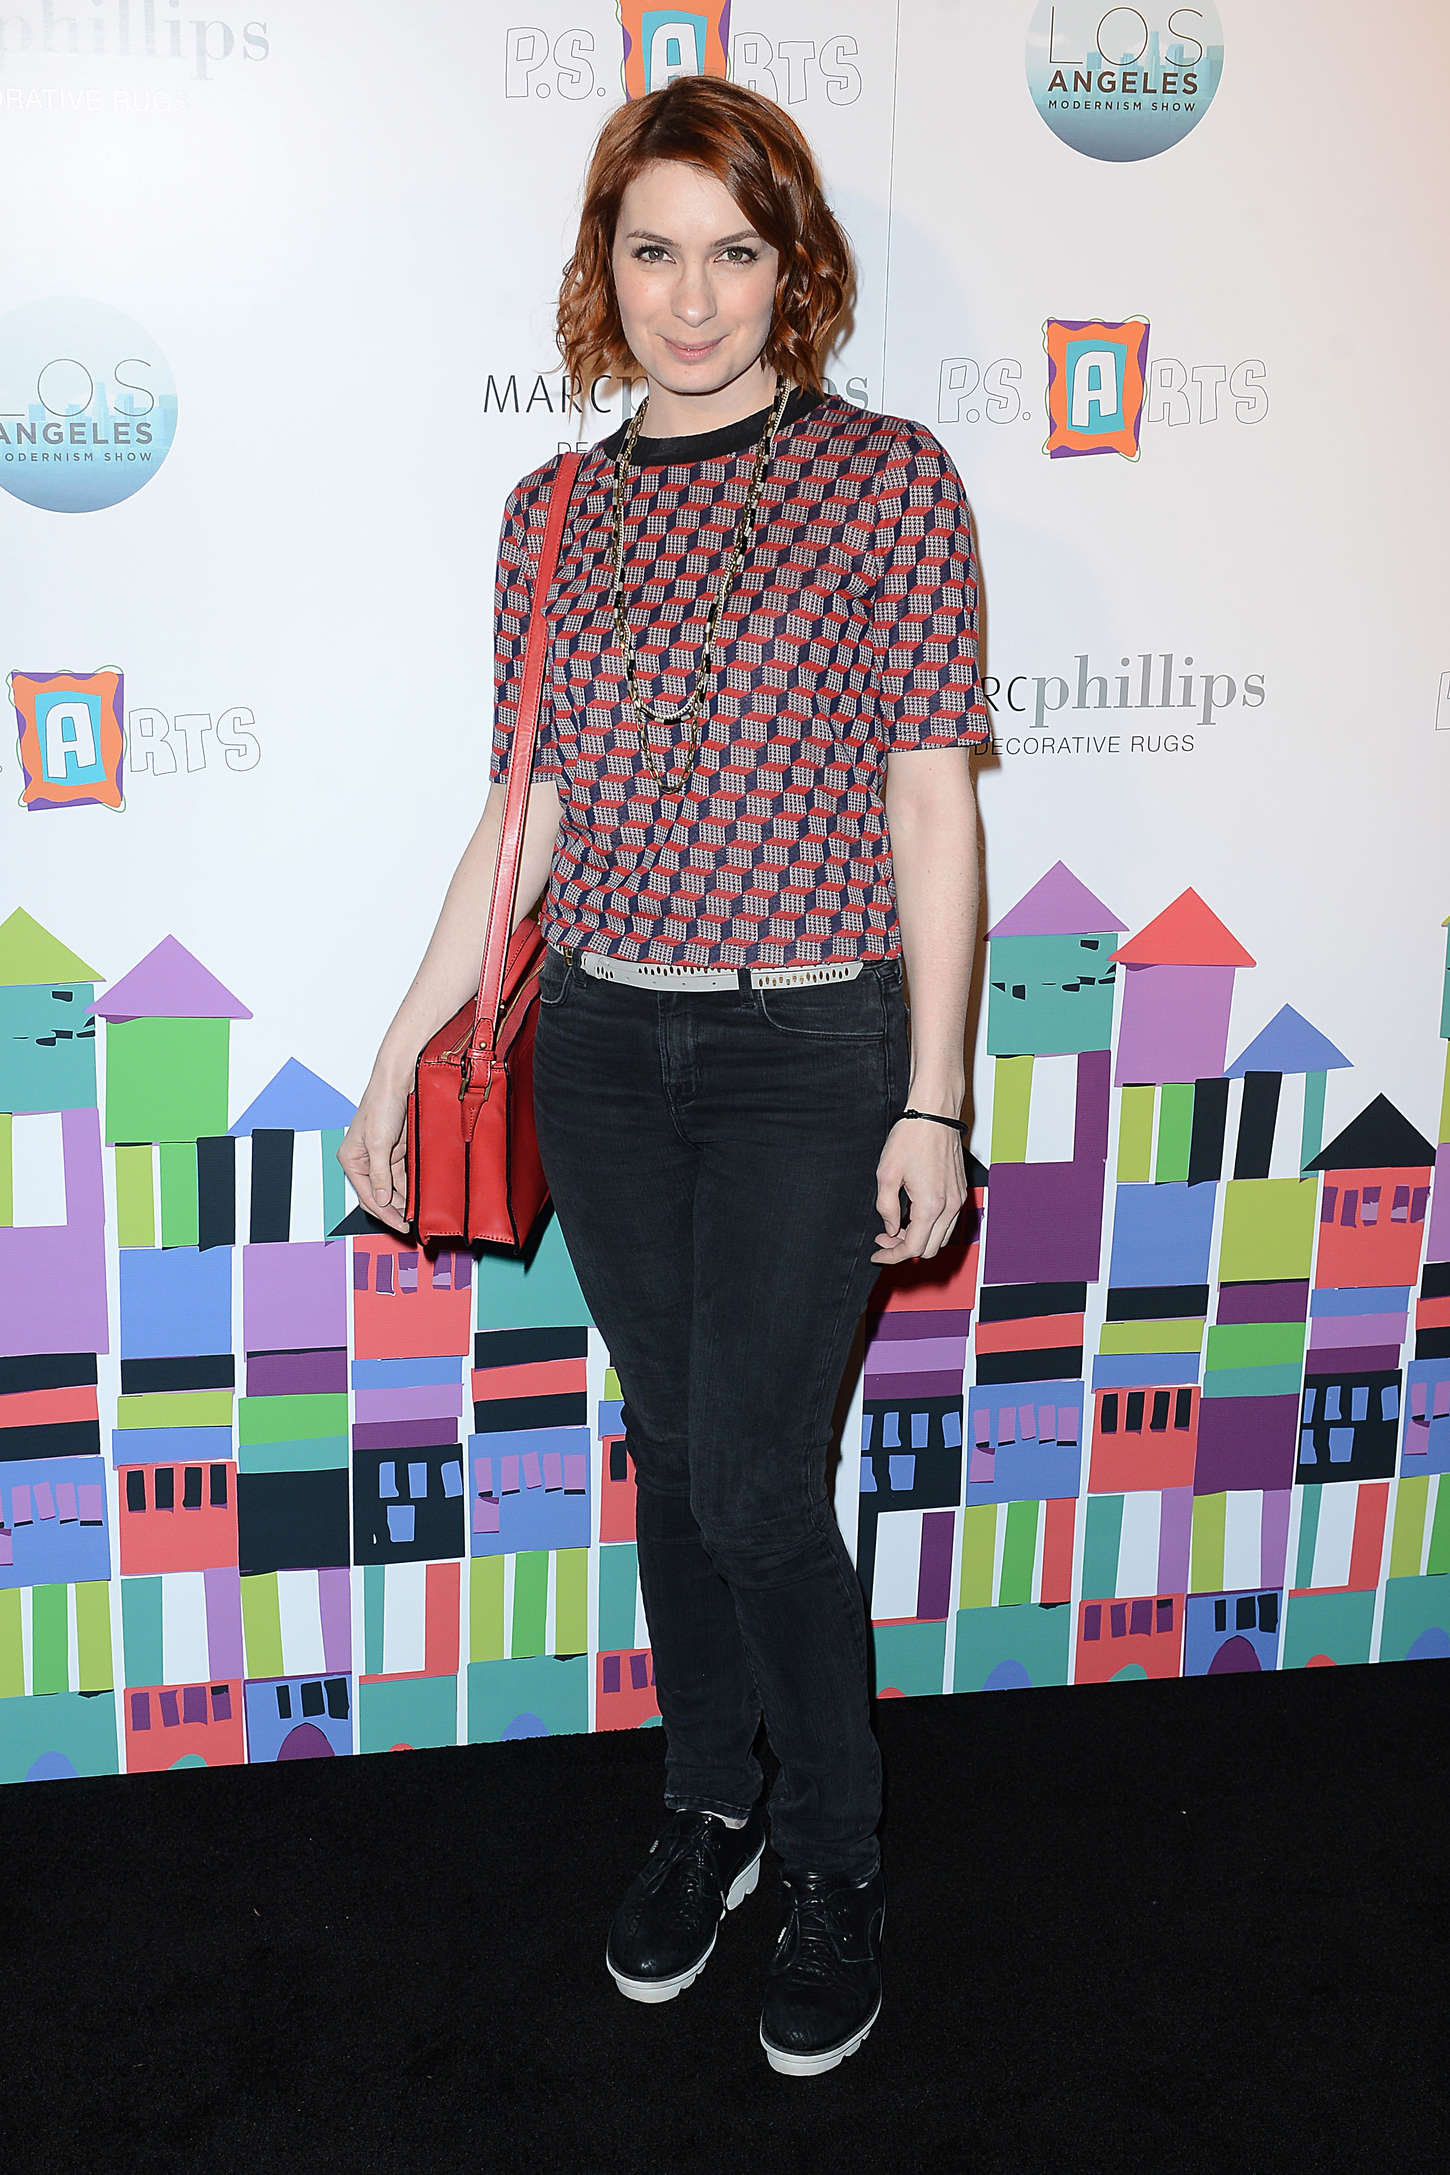 Felicia Day PS ARTS Presents Los Angeles Modernism Opening Night Party in Culver City